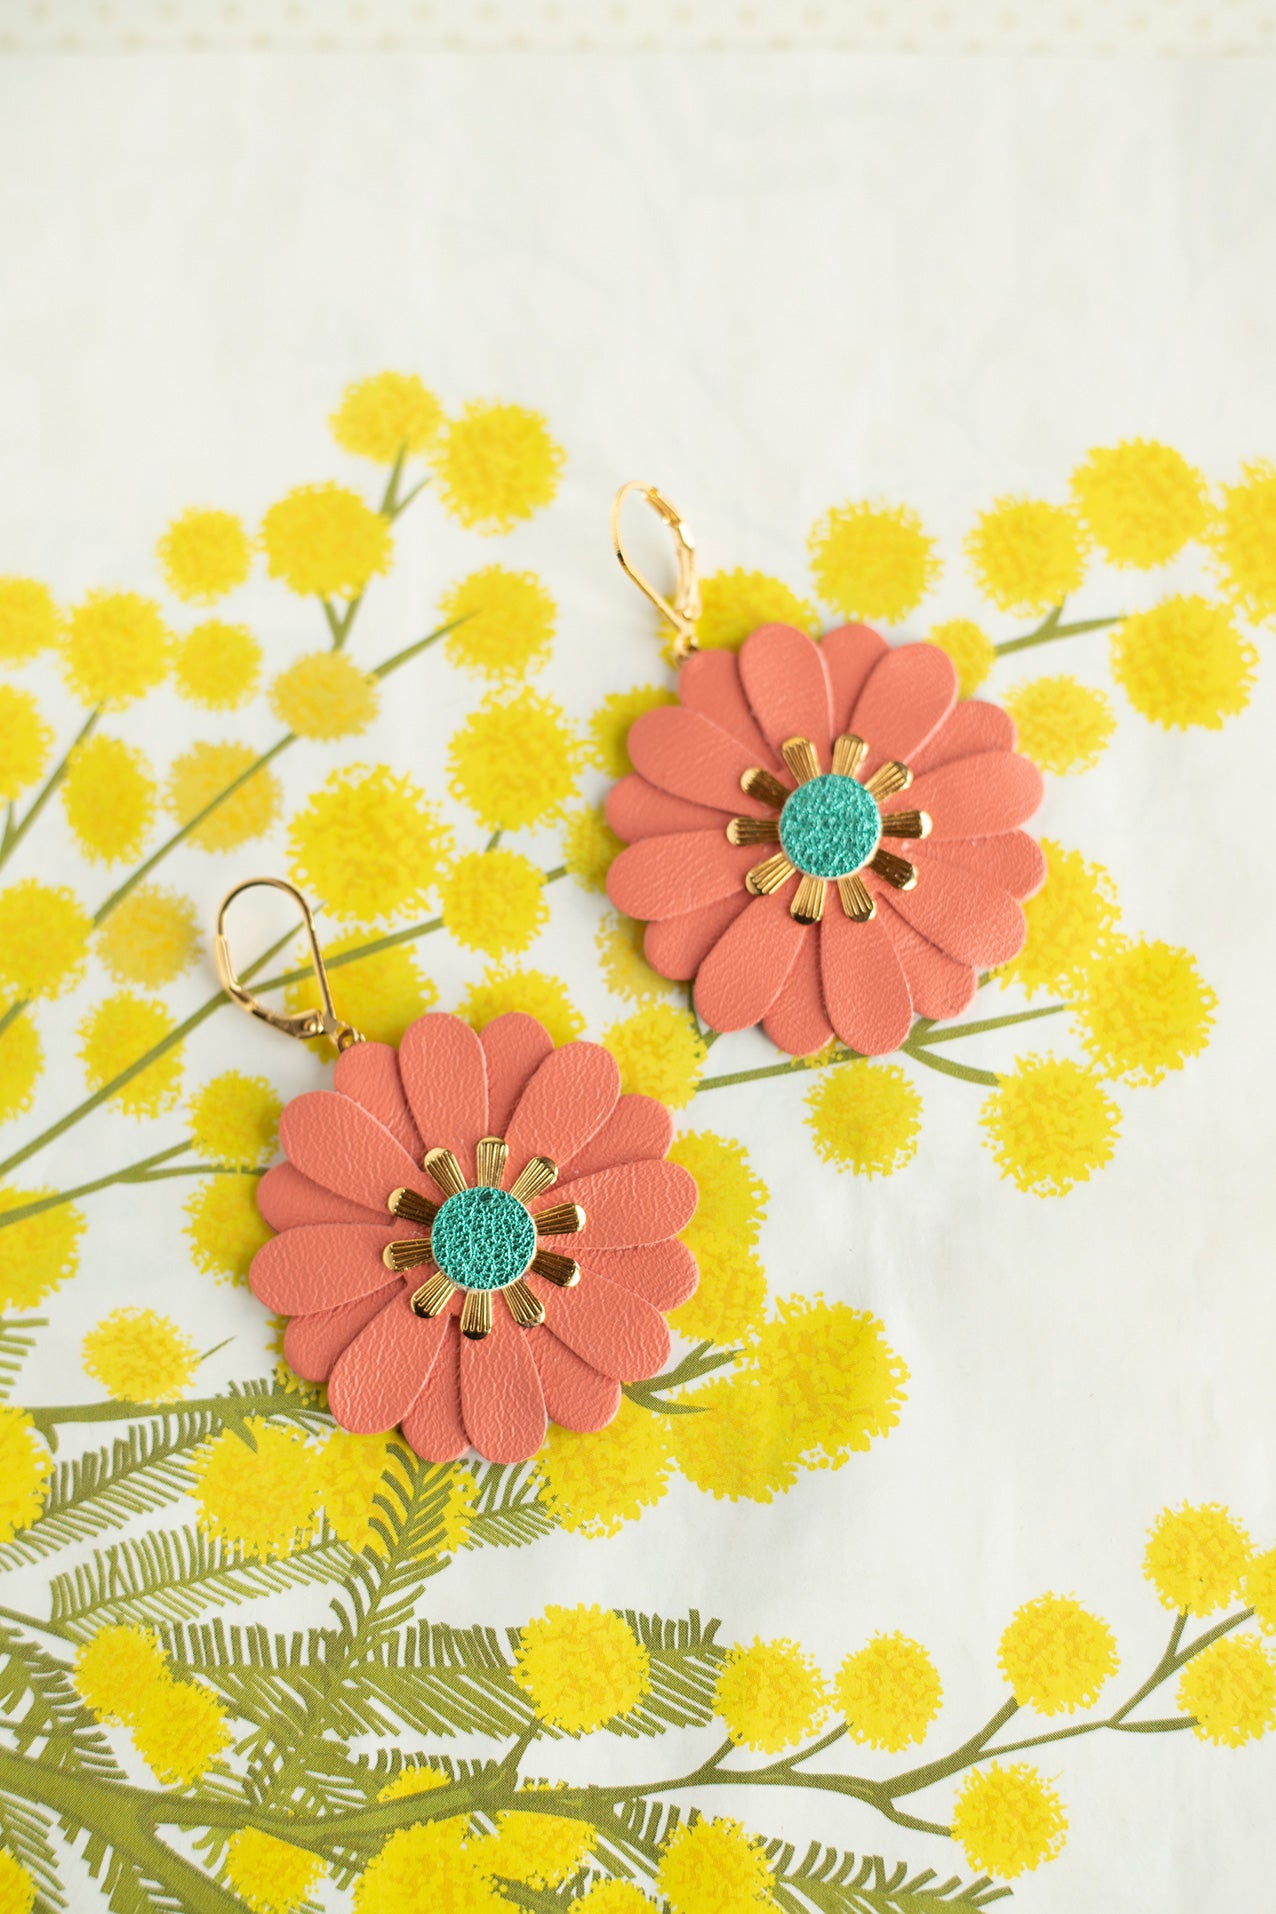 Zinnia flower earrings - coral pink leather